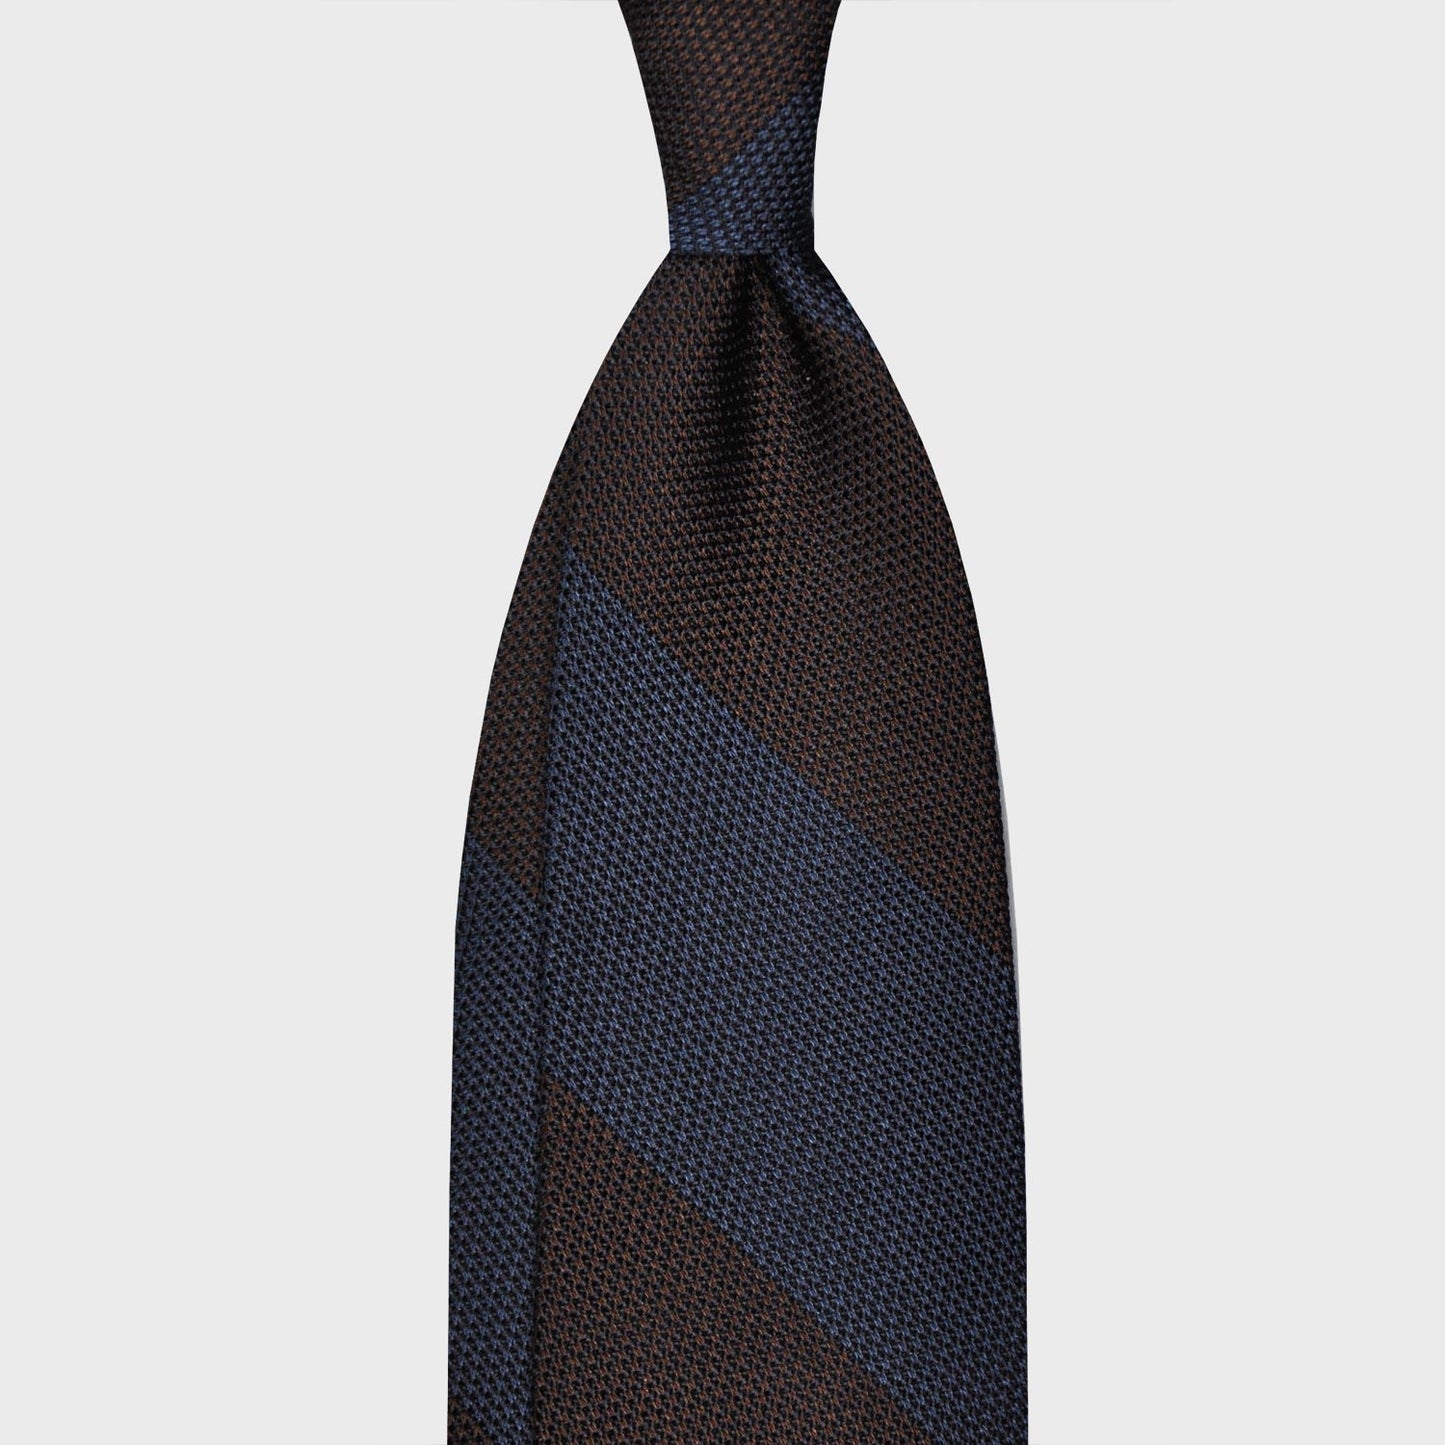 Load image into Gallery viewer, Brown Regimental Grenadine Silk Tie Wide Striped. Wide striped silk tie, made with refined grenadine silk, hand made tie F.Marino Napoli exclusive for Wools Boutique Uomo, hand rolled edge, 3 folds unlined, striped coffee brown and navy blue
